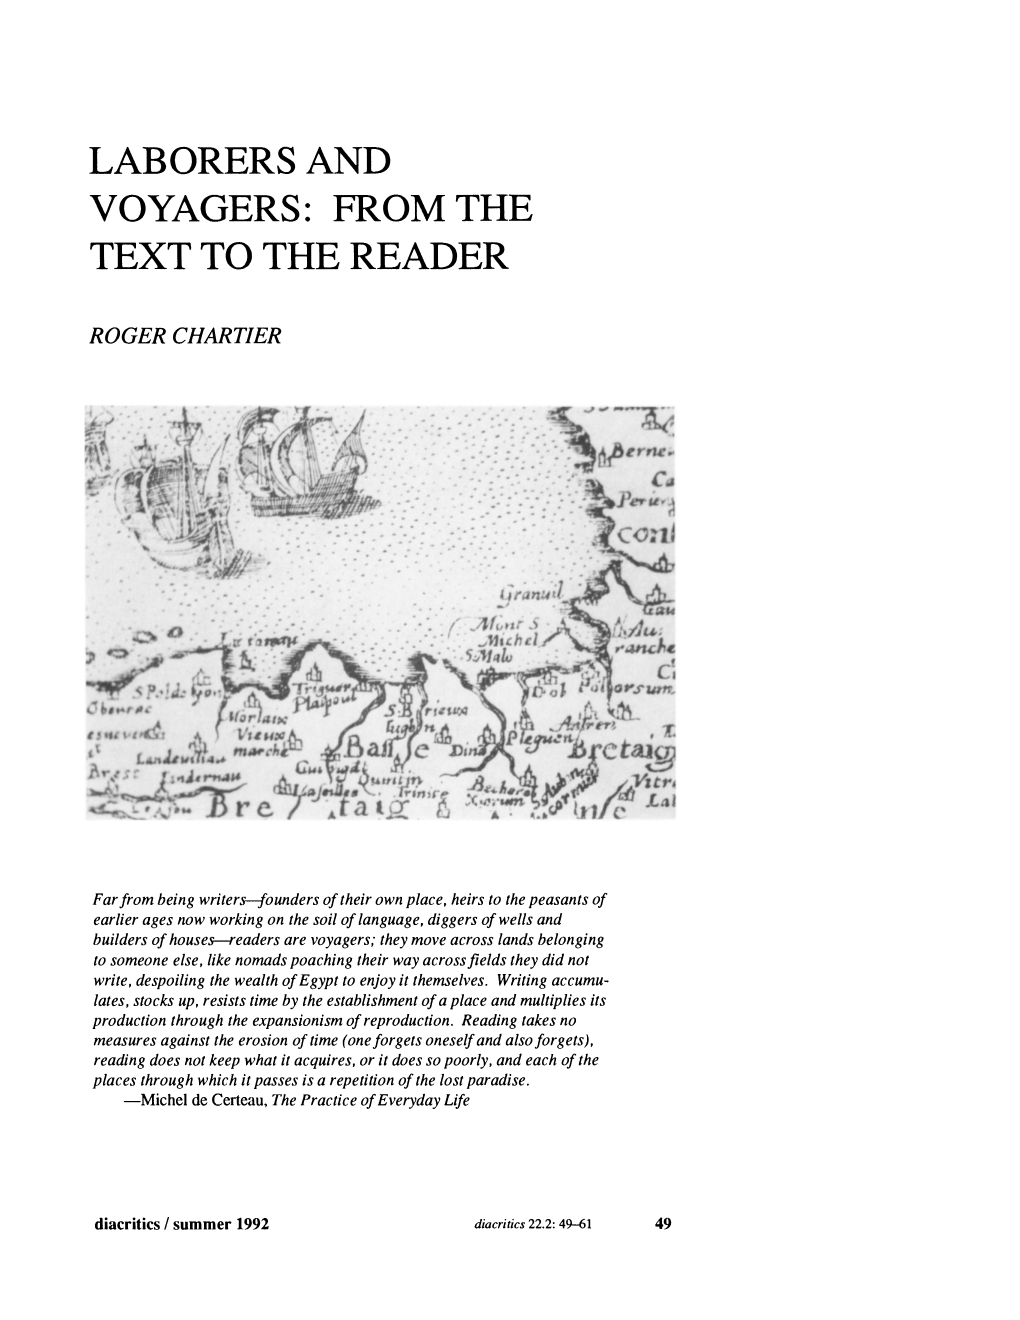 Laborers and Voyagers: from the Text to the Reader